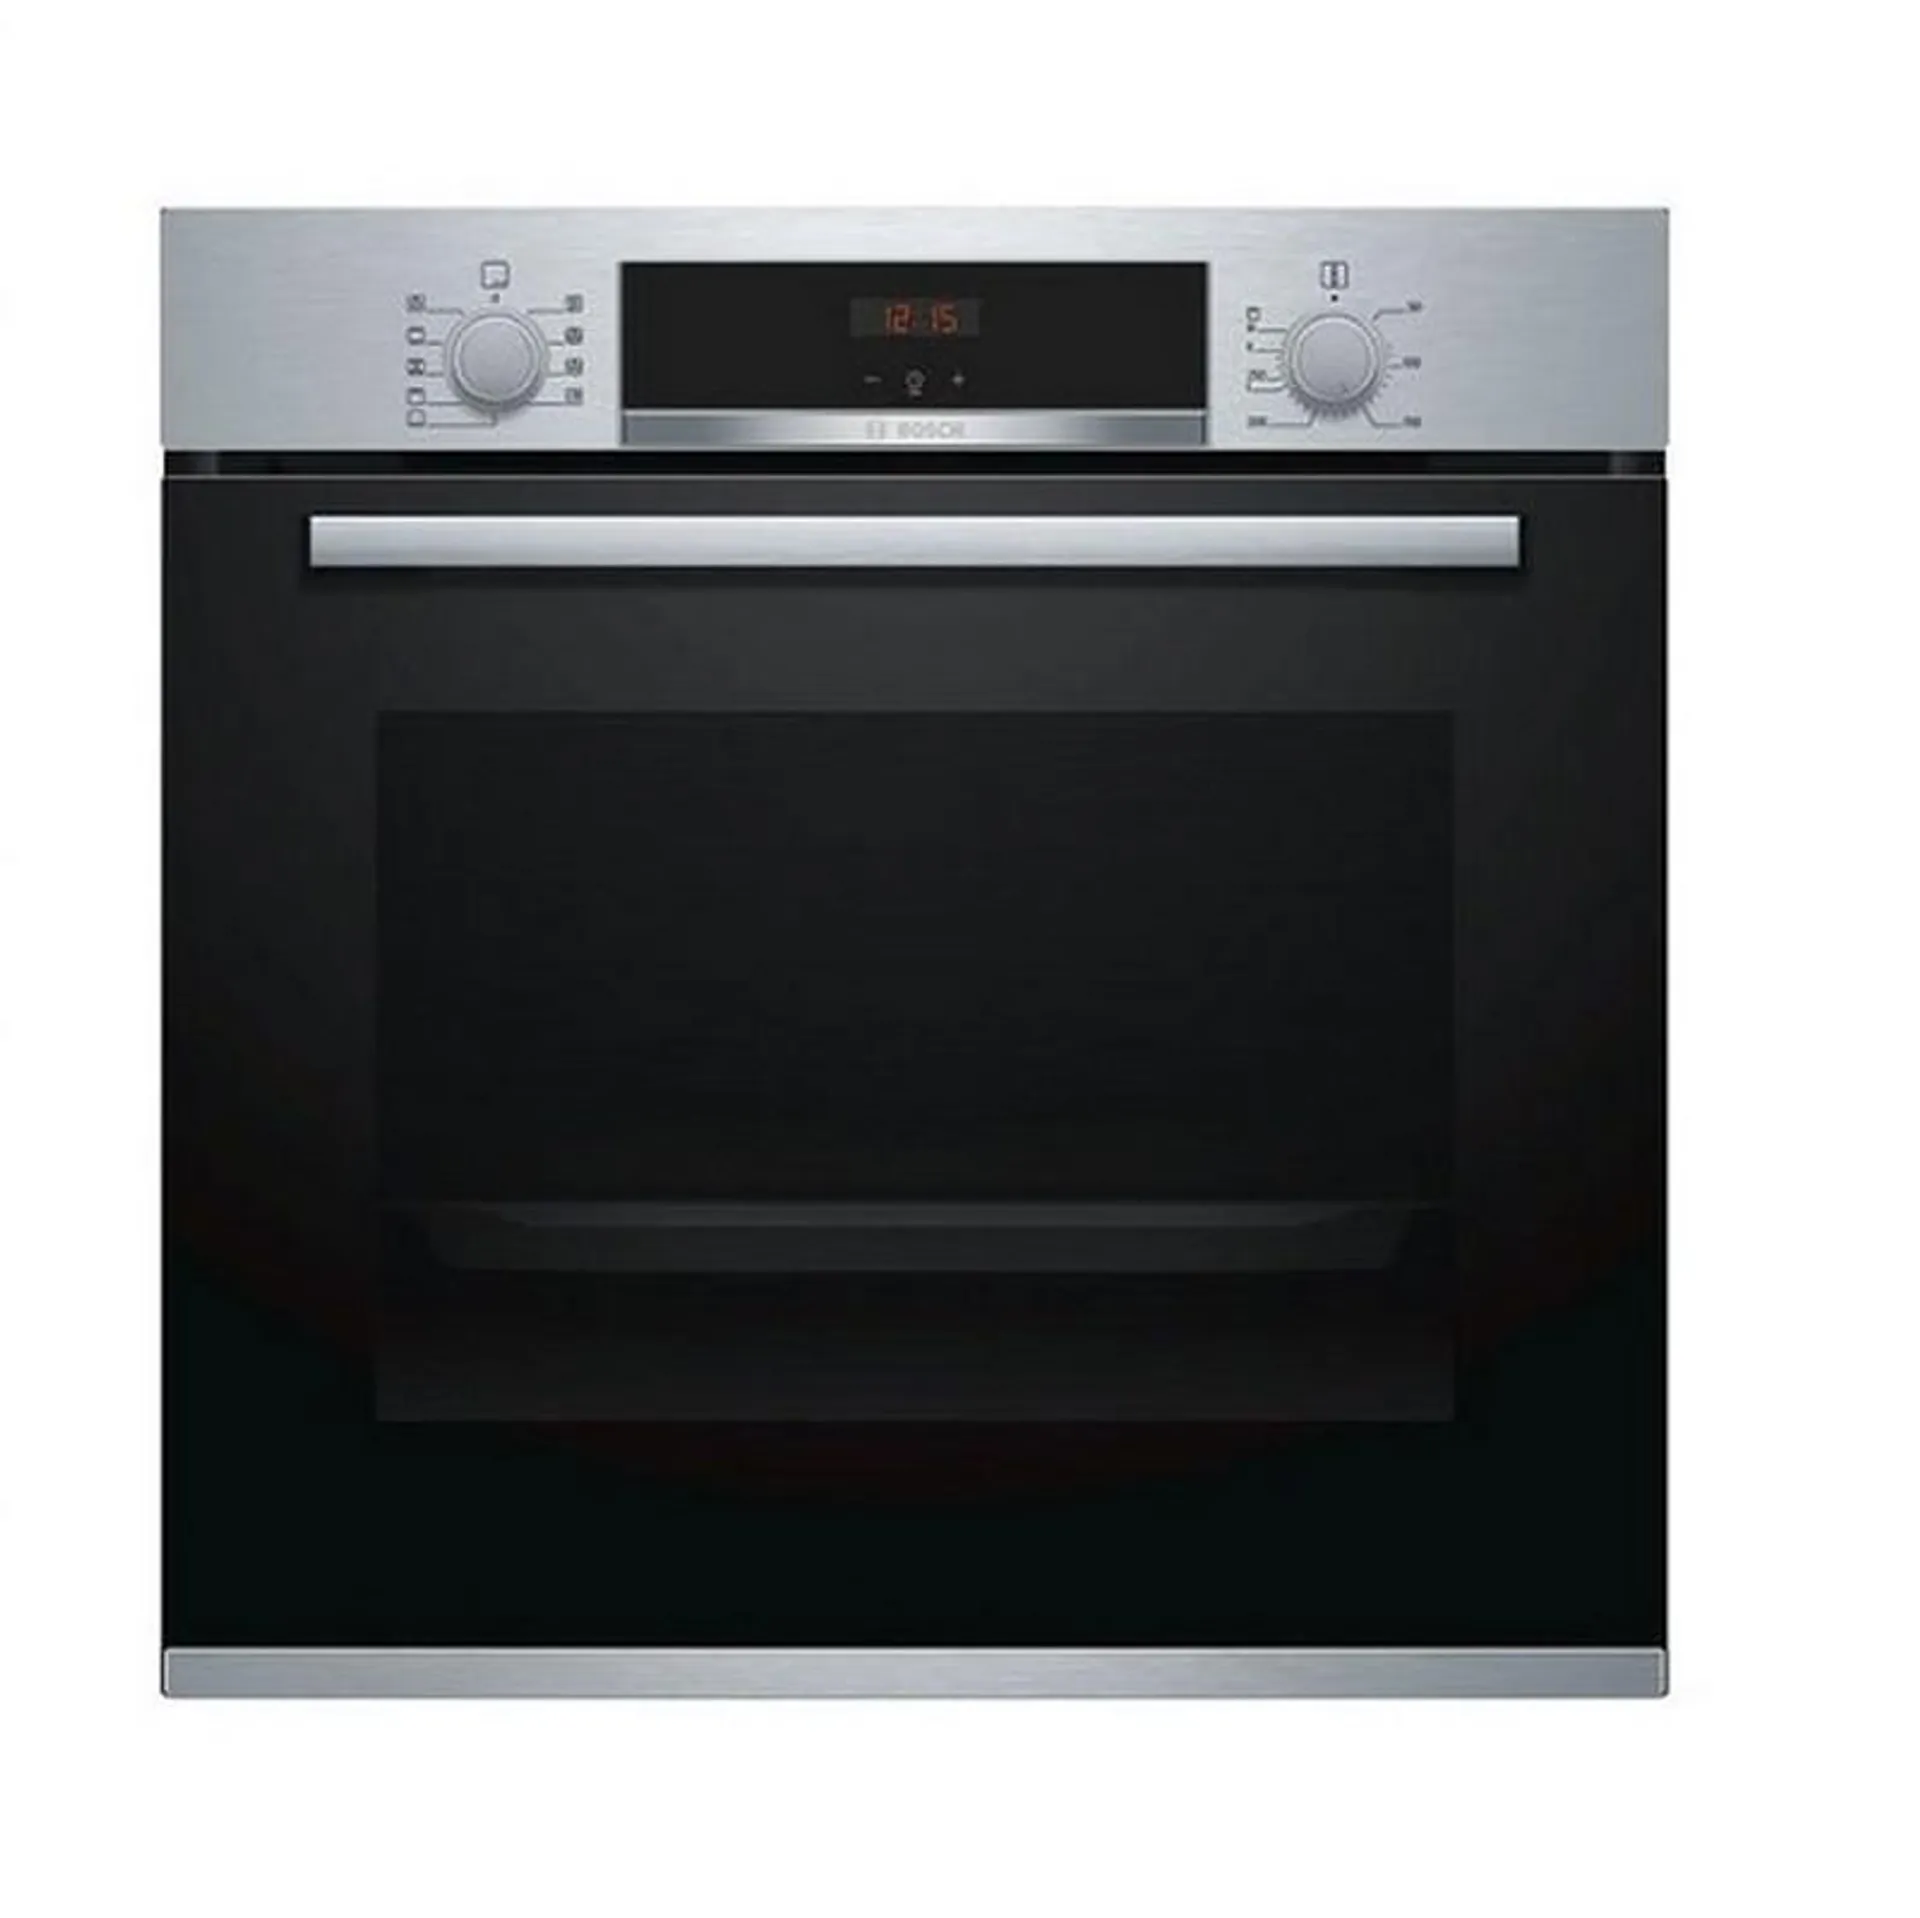 Bosch Series 4 Built-in Single Oven | Stainless Steel